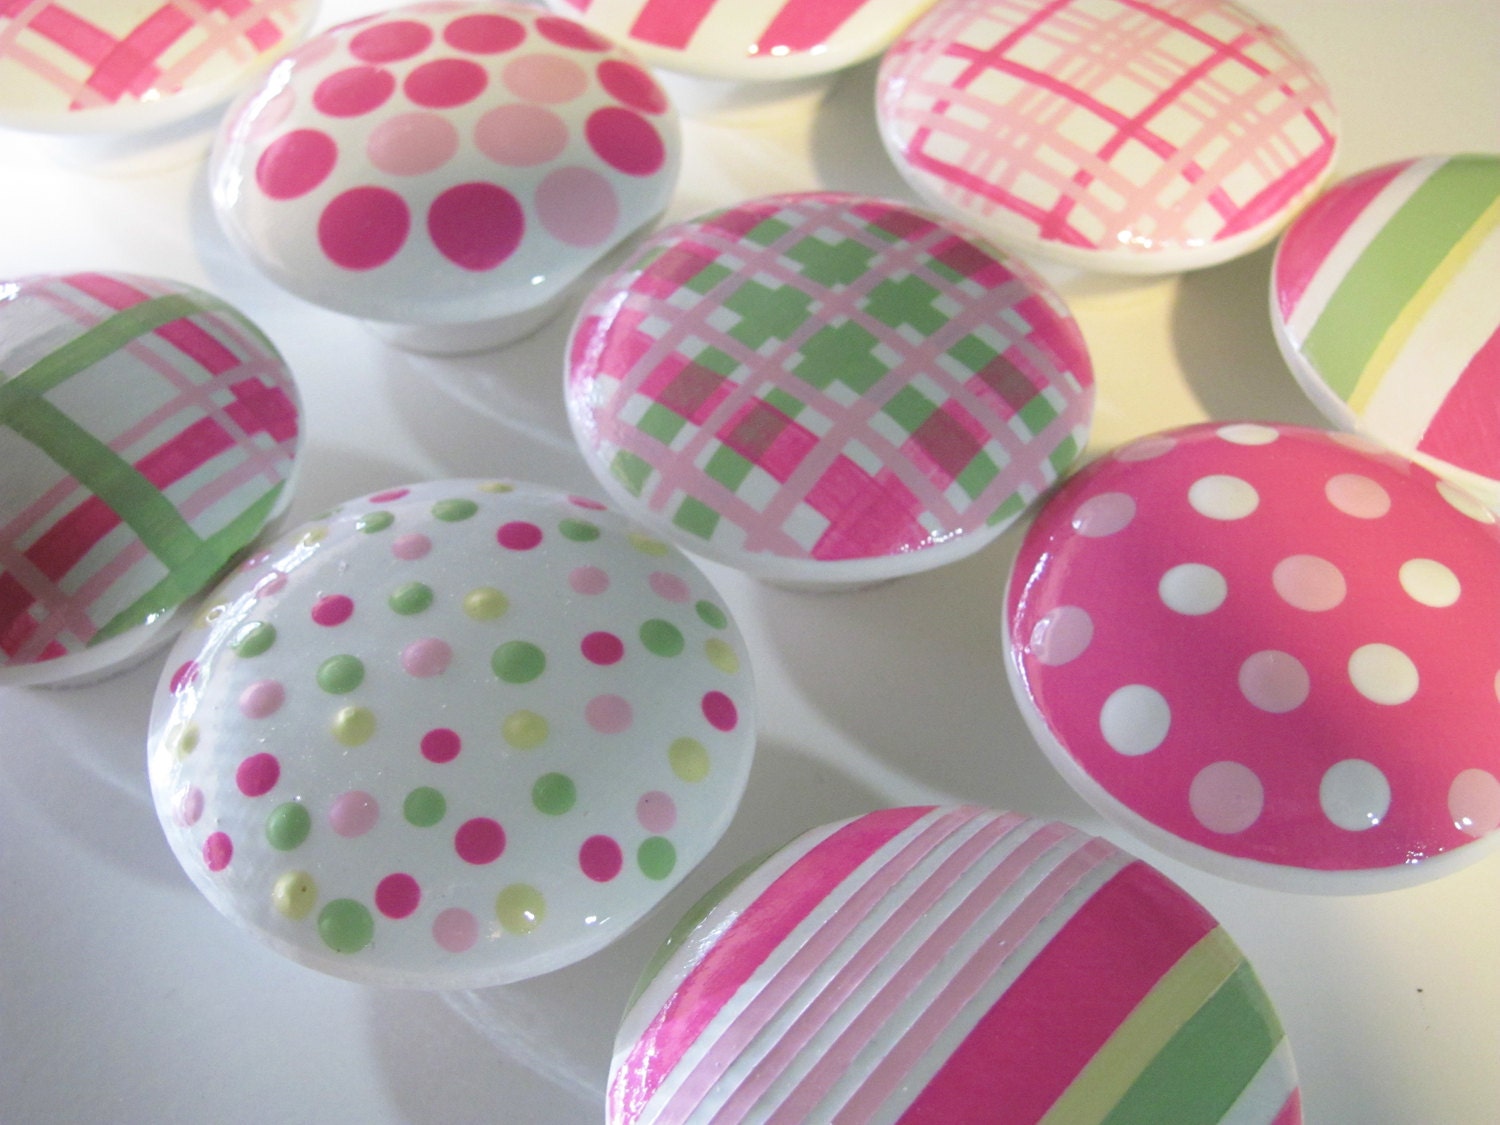 Kid Knobs- Children's Drawer Knobs- Hand Painted Wood Knobs - Stripes, Polka Dot and Plaid Knobs Pink and Green - Size 2 inches-SET OF 12